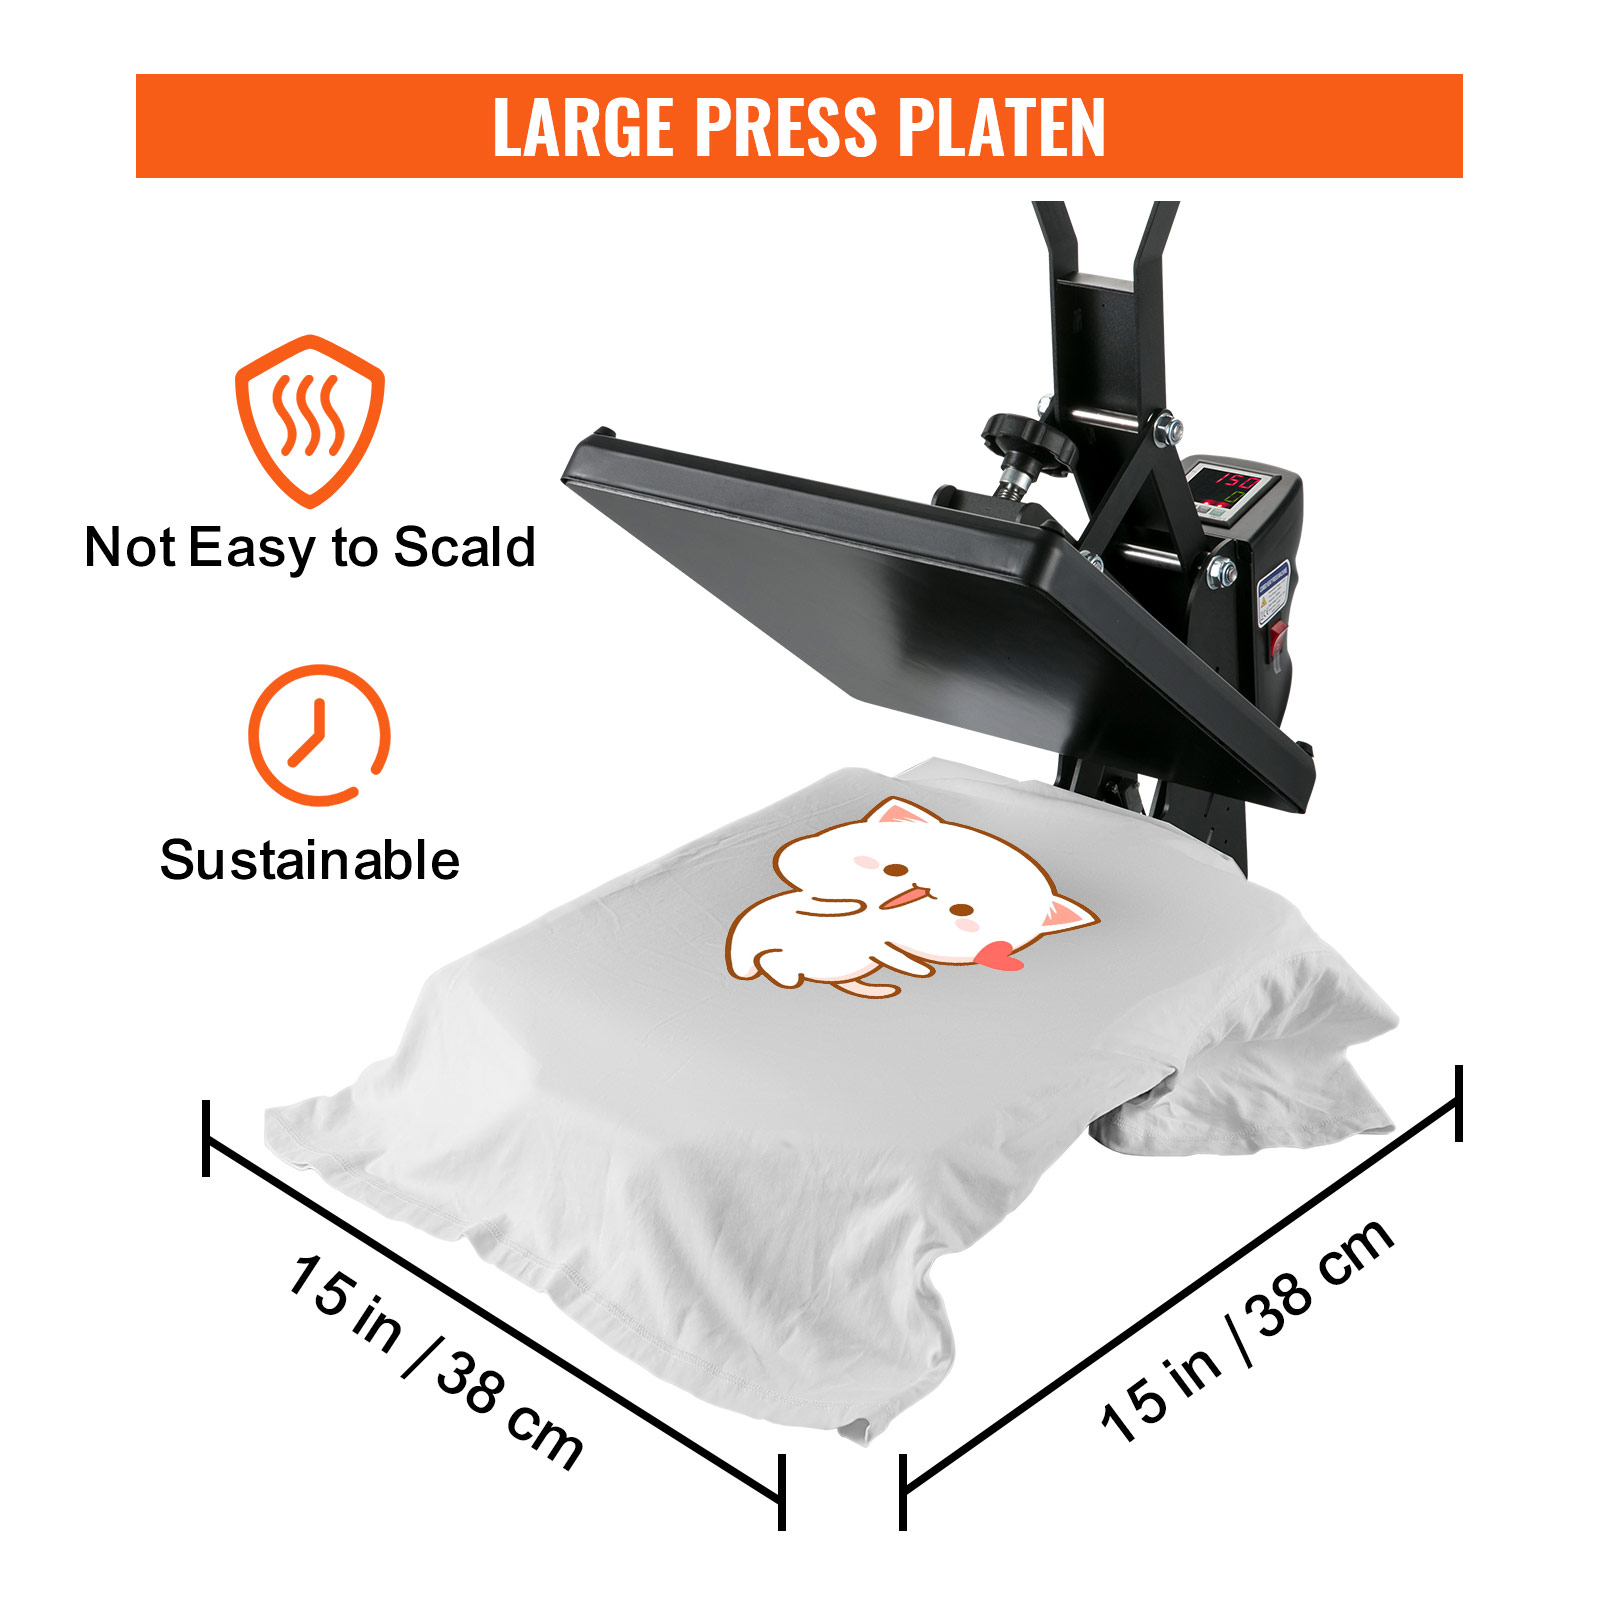  Iglobalbuy 15 x 15 Inch Heat Press Machine Sublimation  Clamshell Design, 15x15 Inch Heat Press for T-Shirt Heat Transfer Printer  Digital Temperature Control & Timer : Arts, Crafts & Sewing